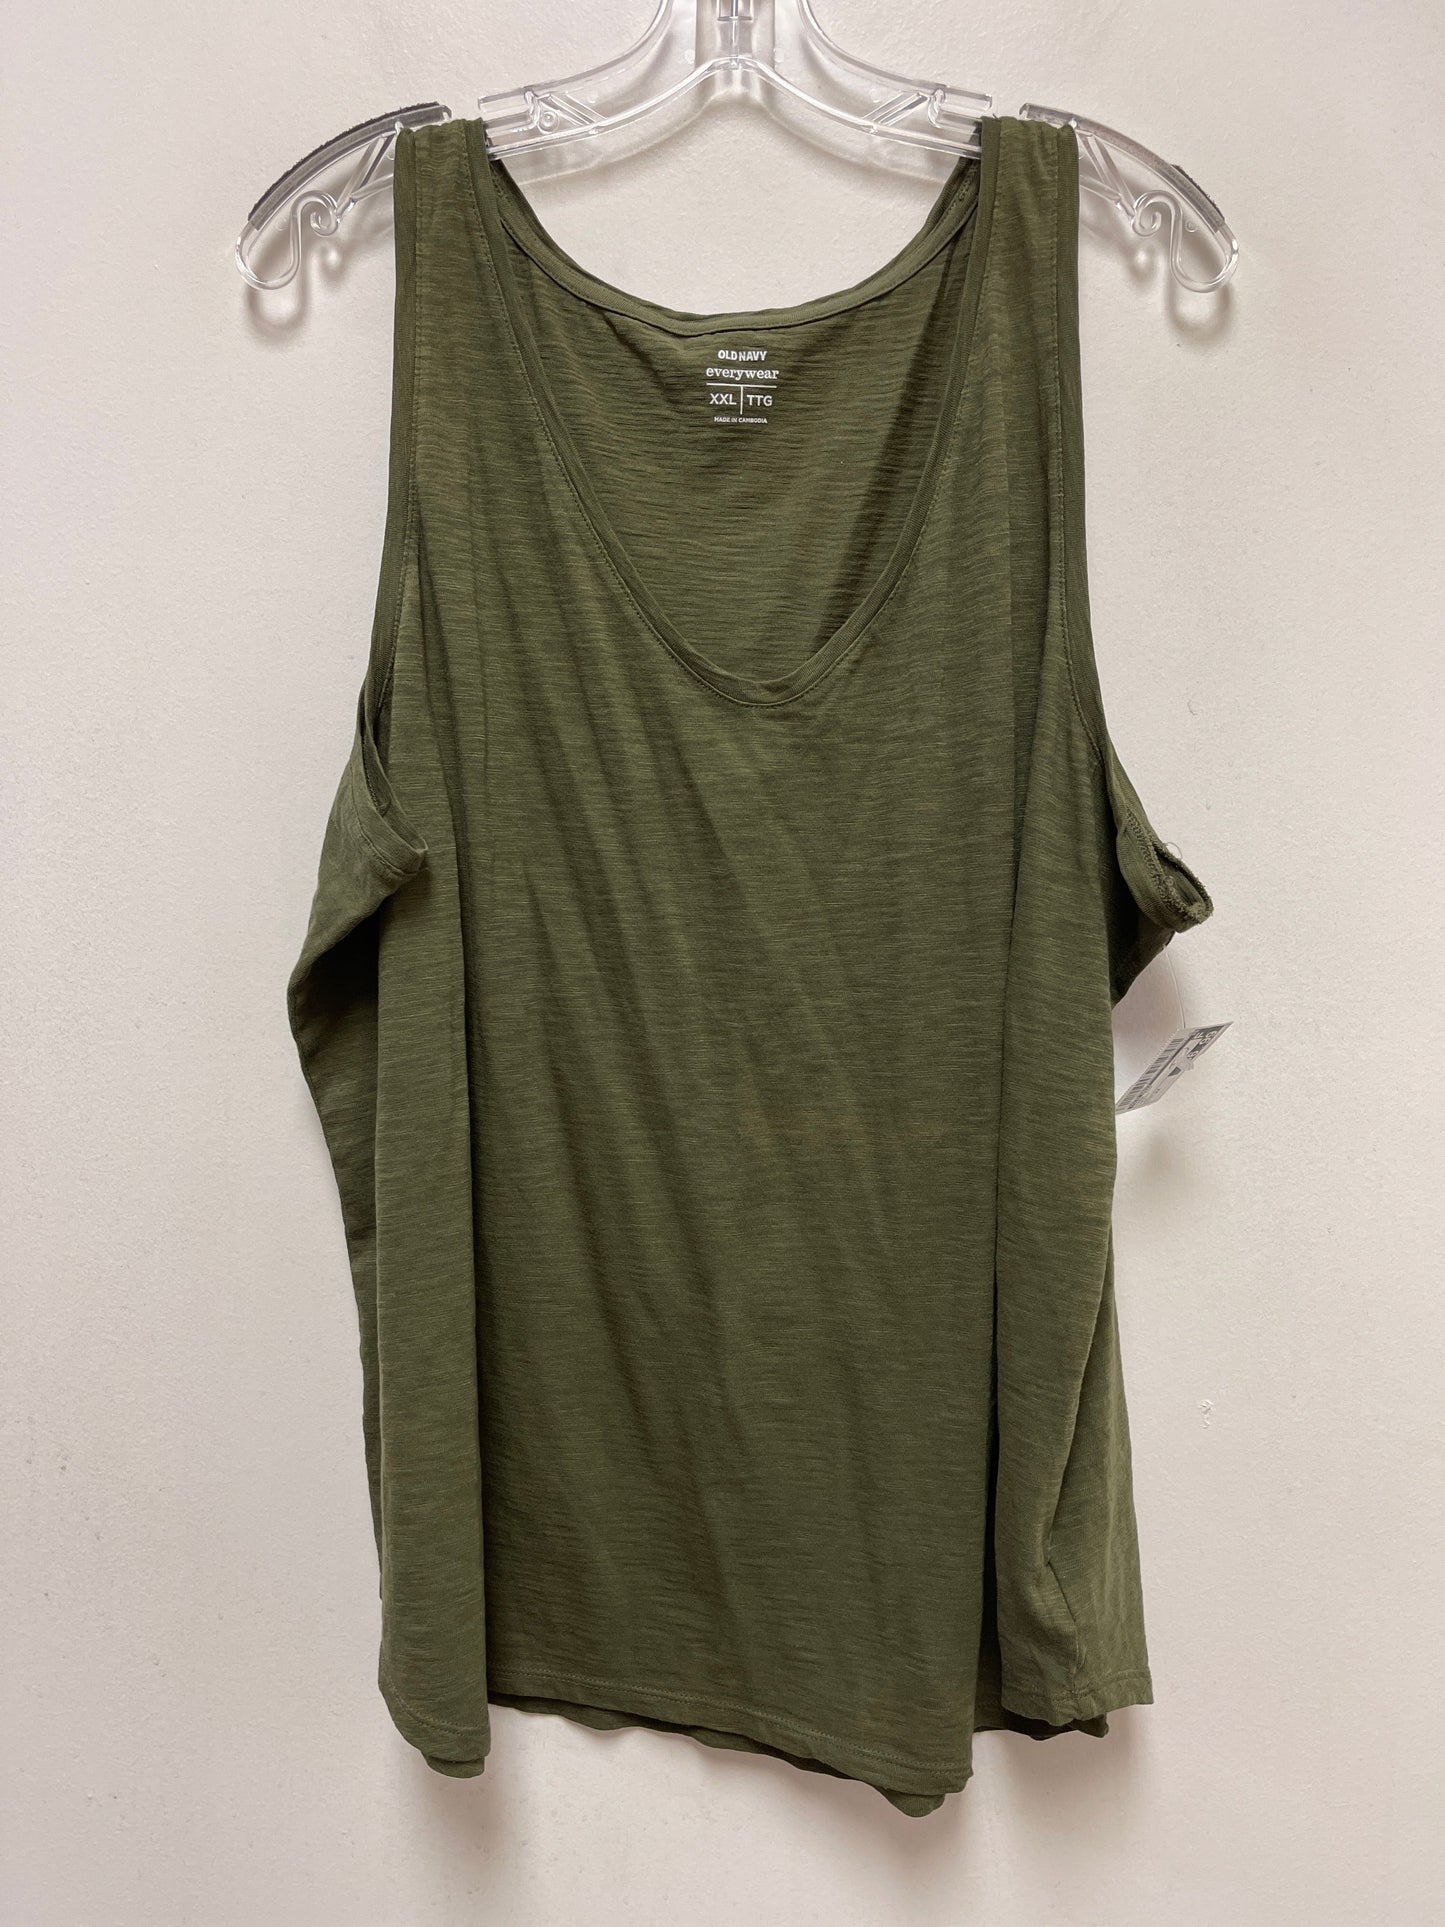 Green Tank Top Old Navy, Size 2x